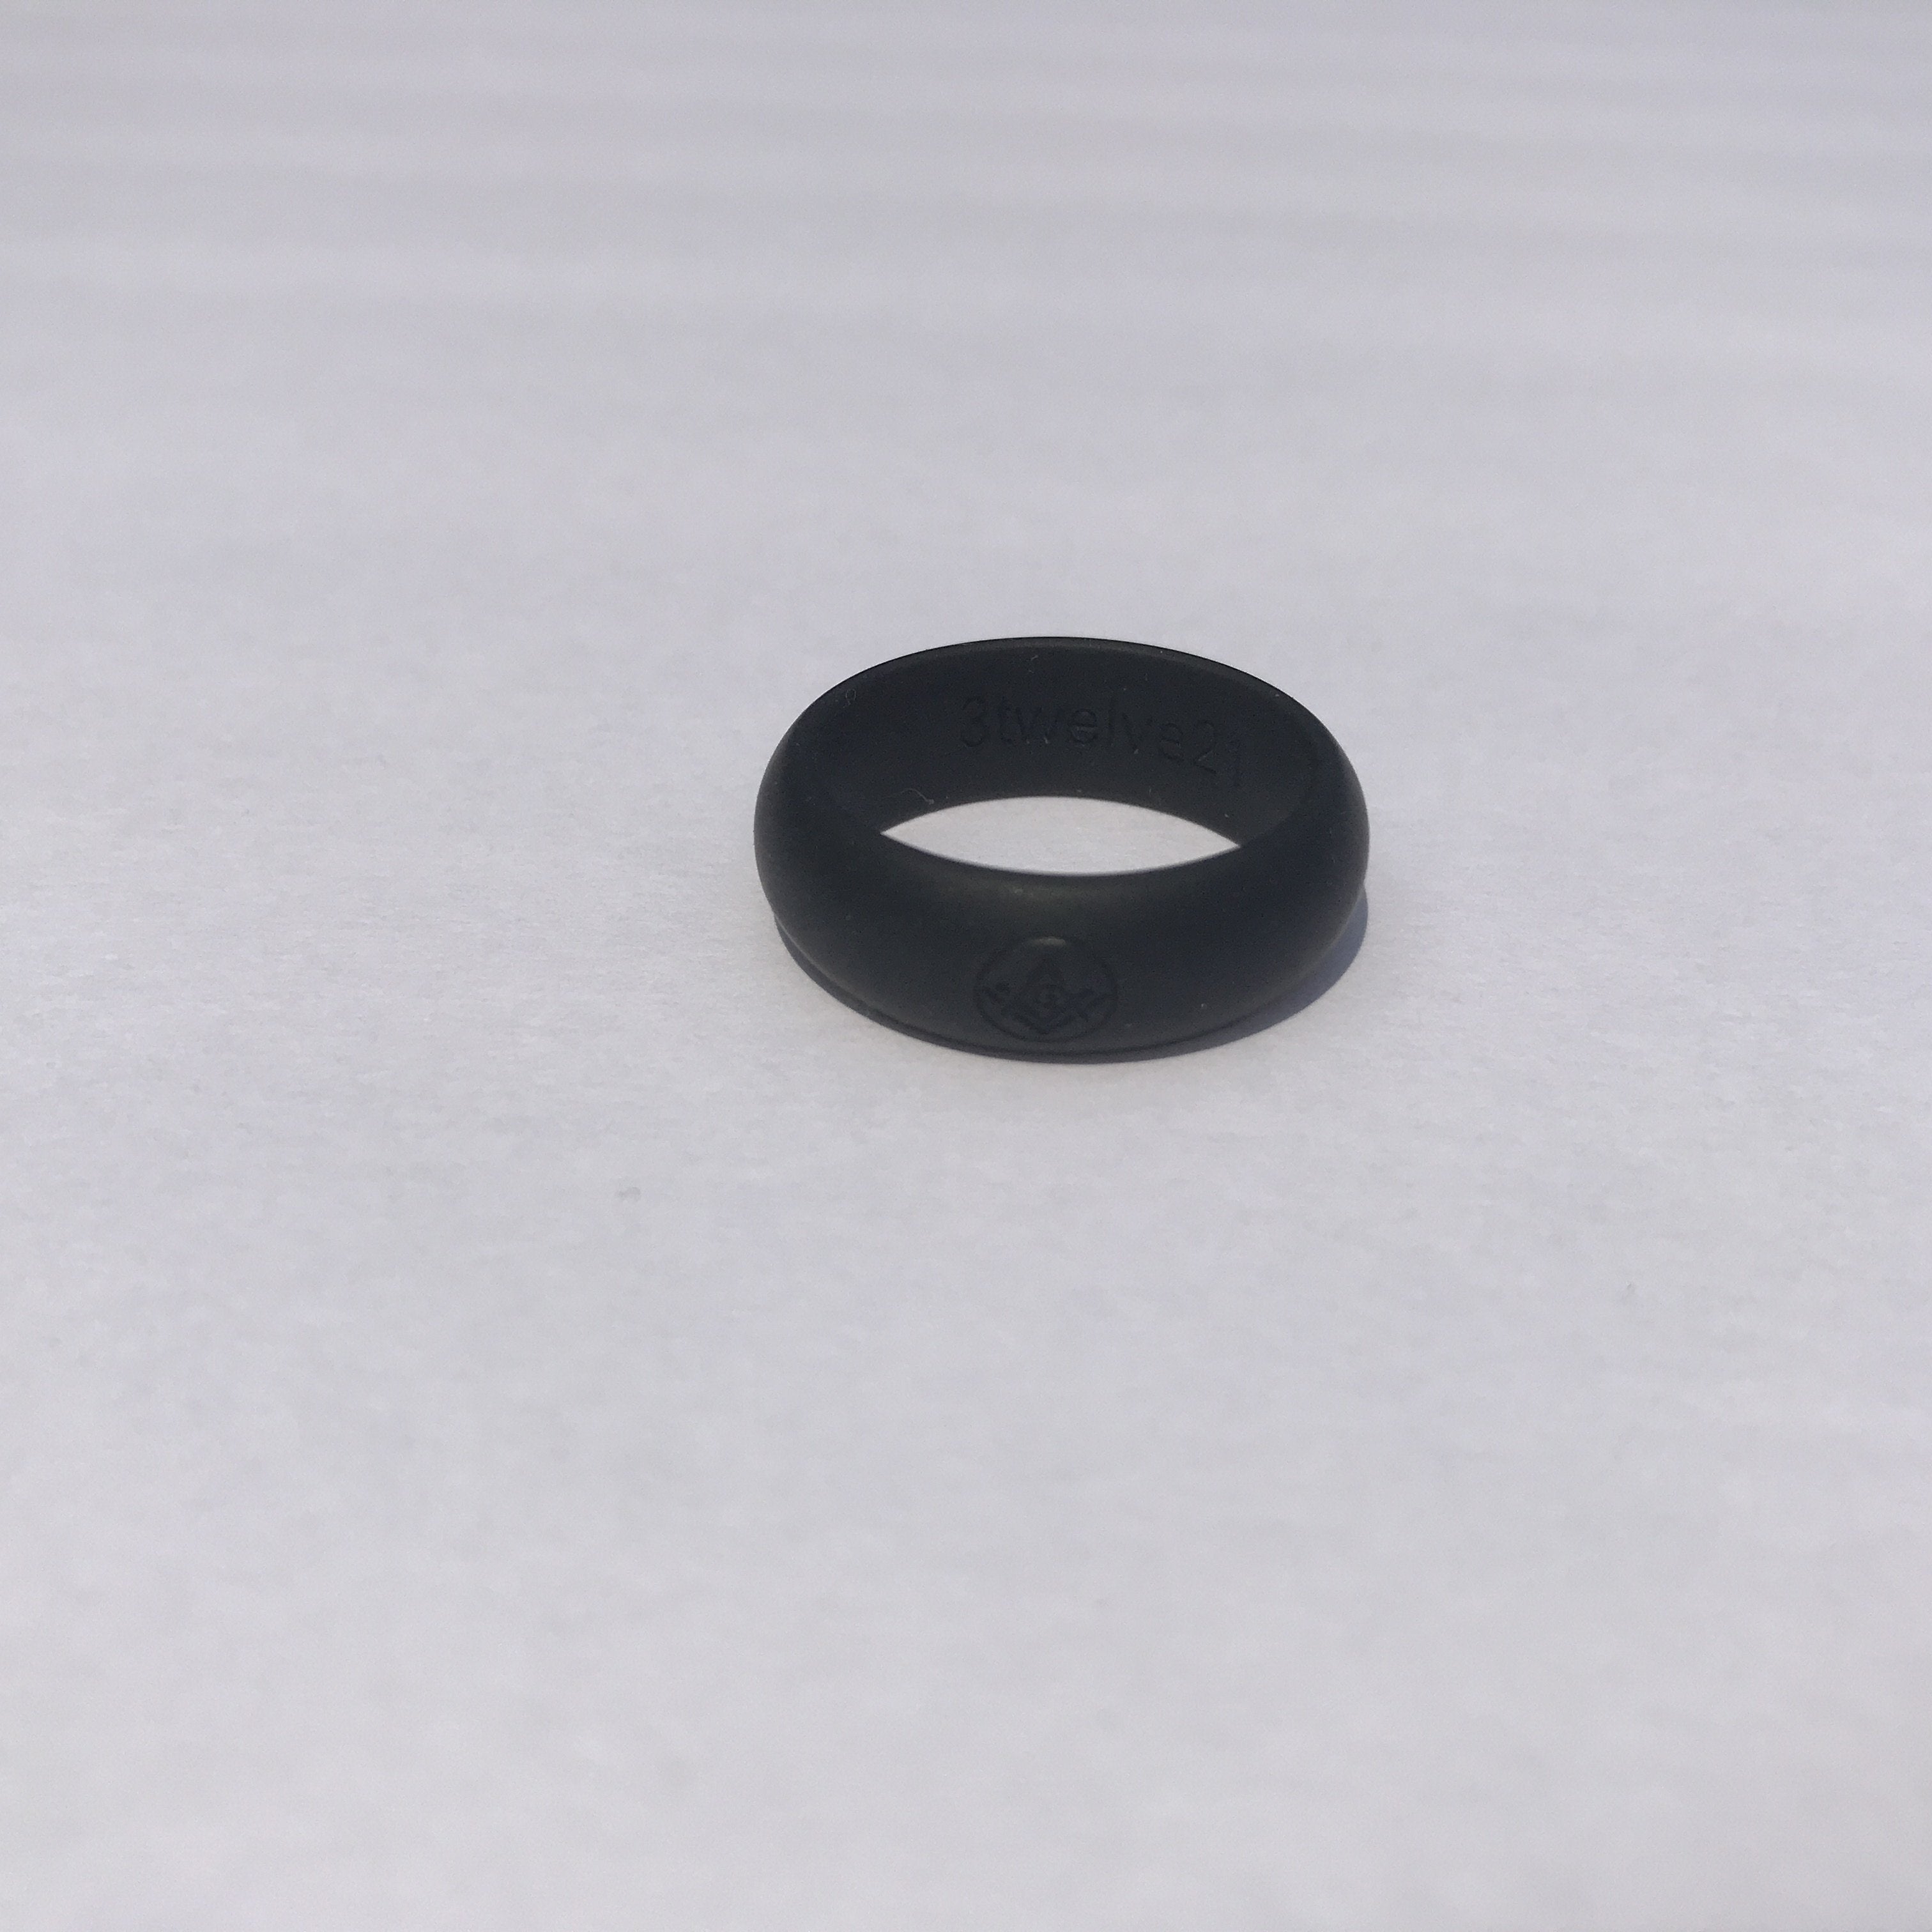 100% Silicone Masonic ring that is work-safe no matter what you do in black